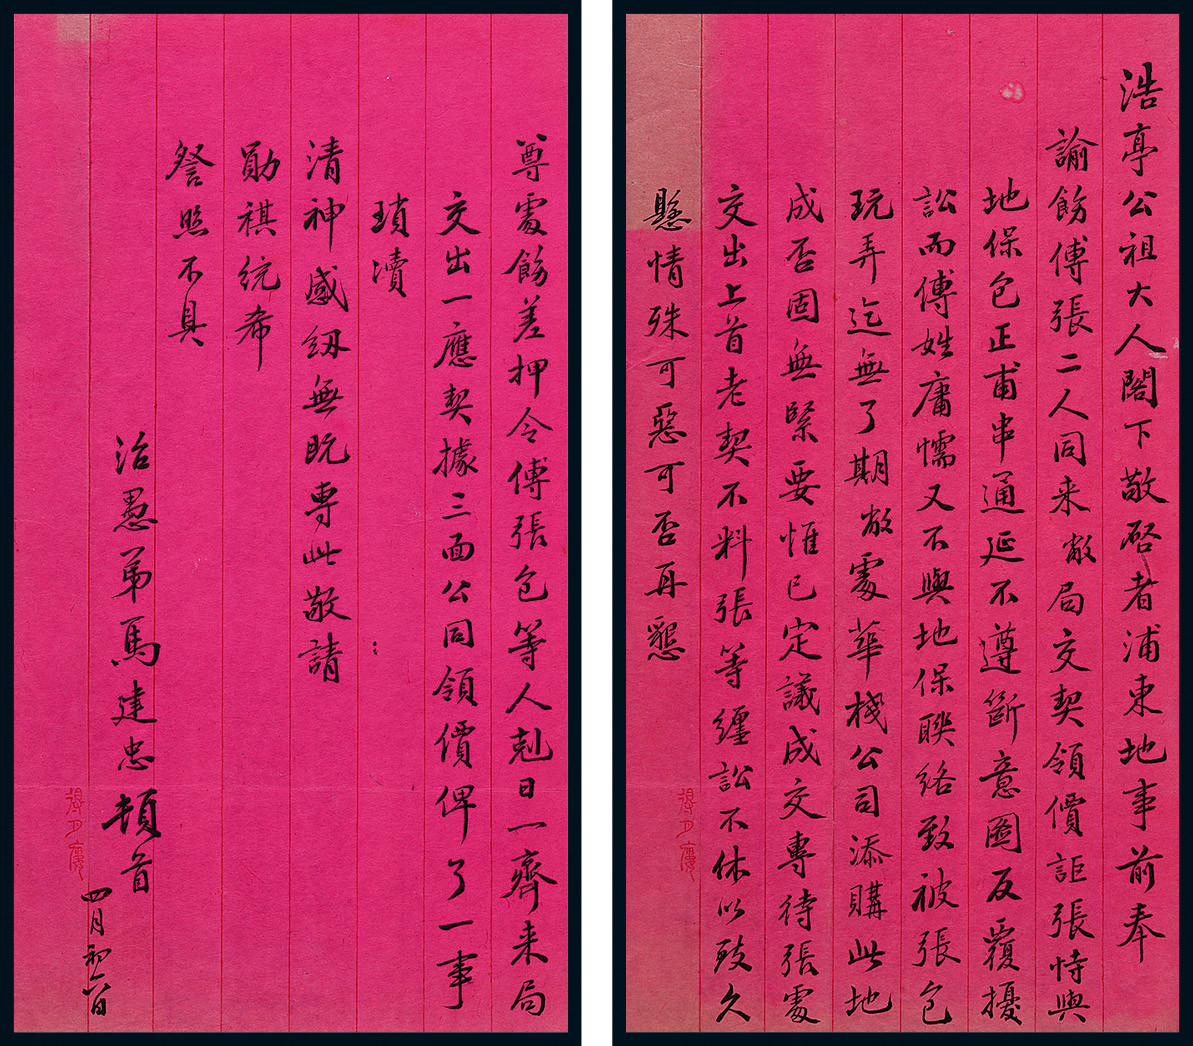 A letter of Ma Jianzhong 2 pages in 1 copy